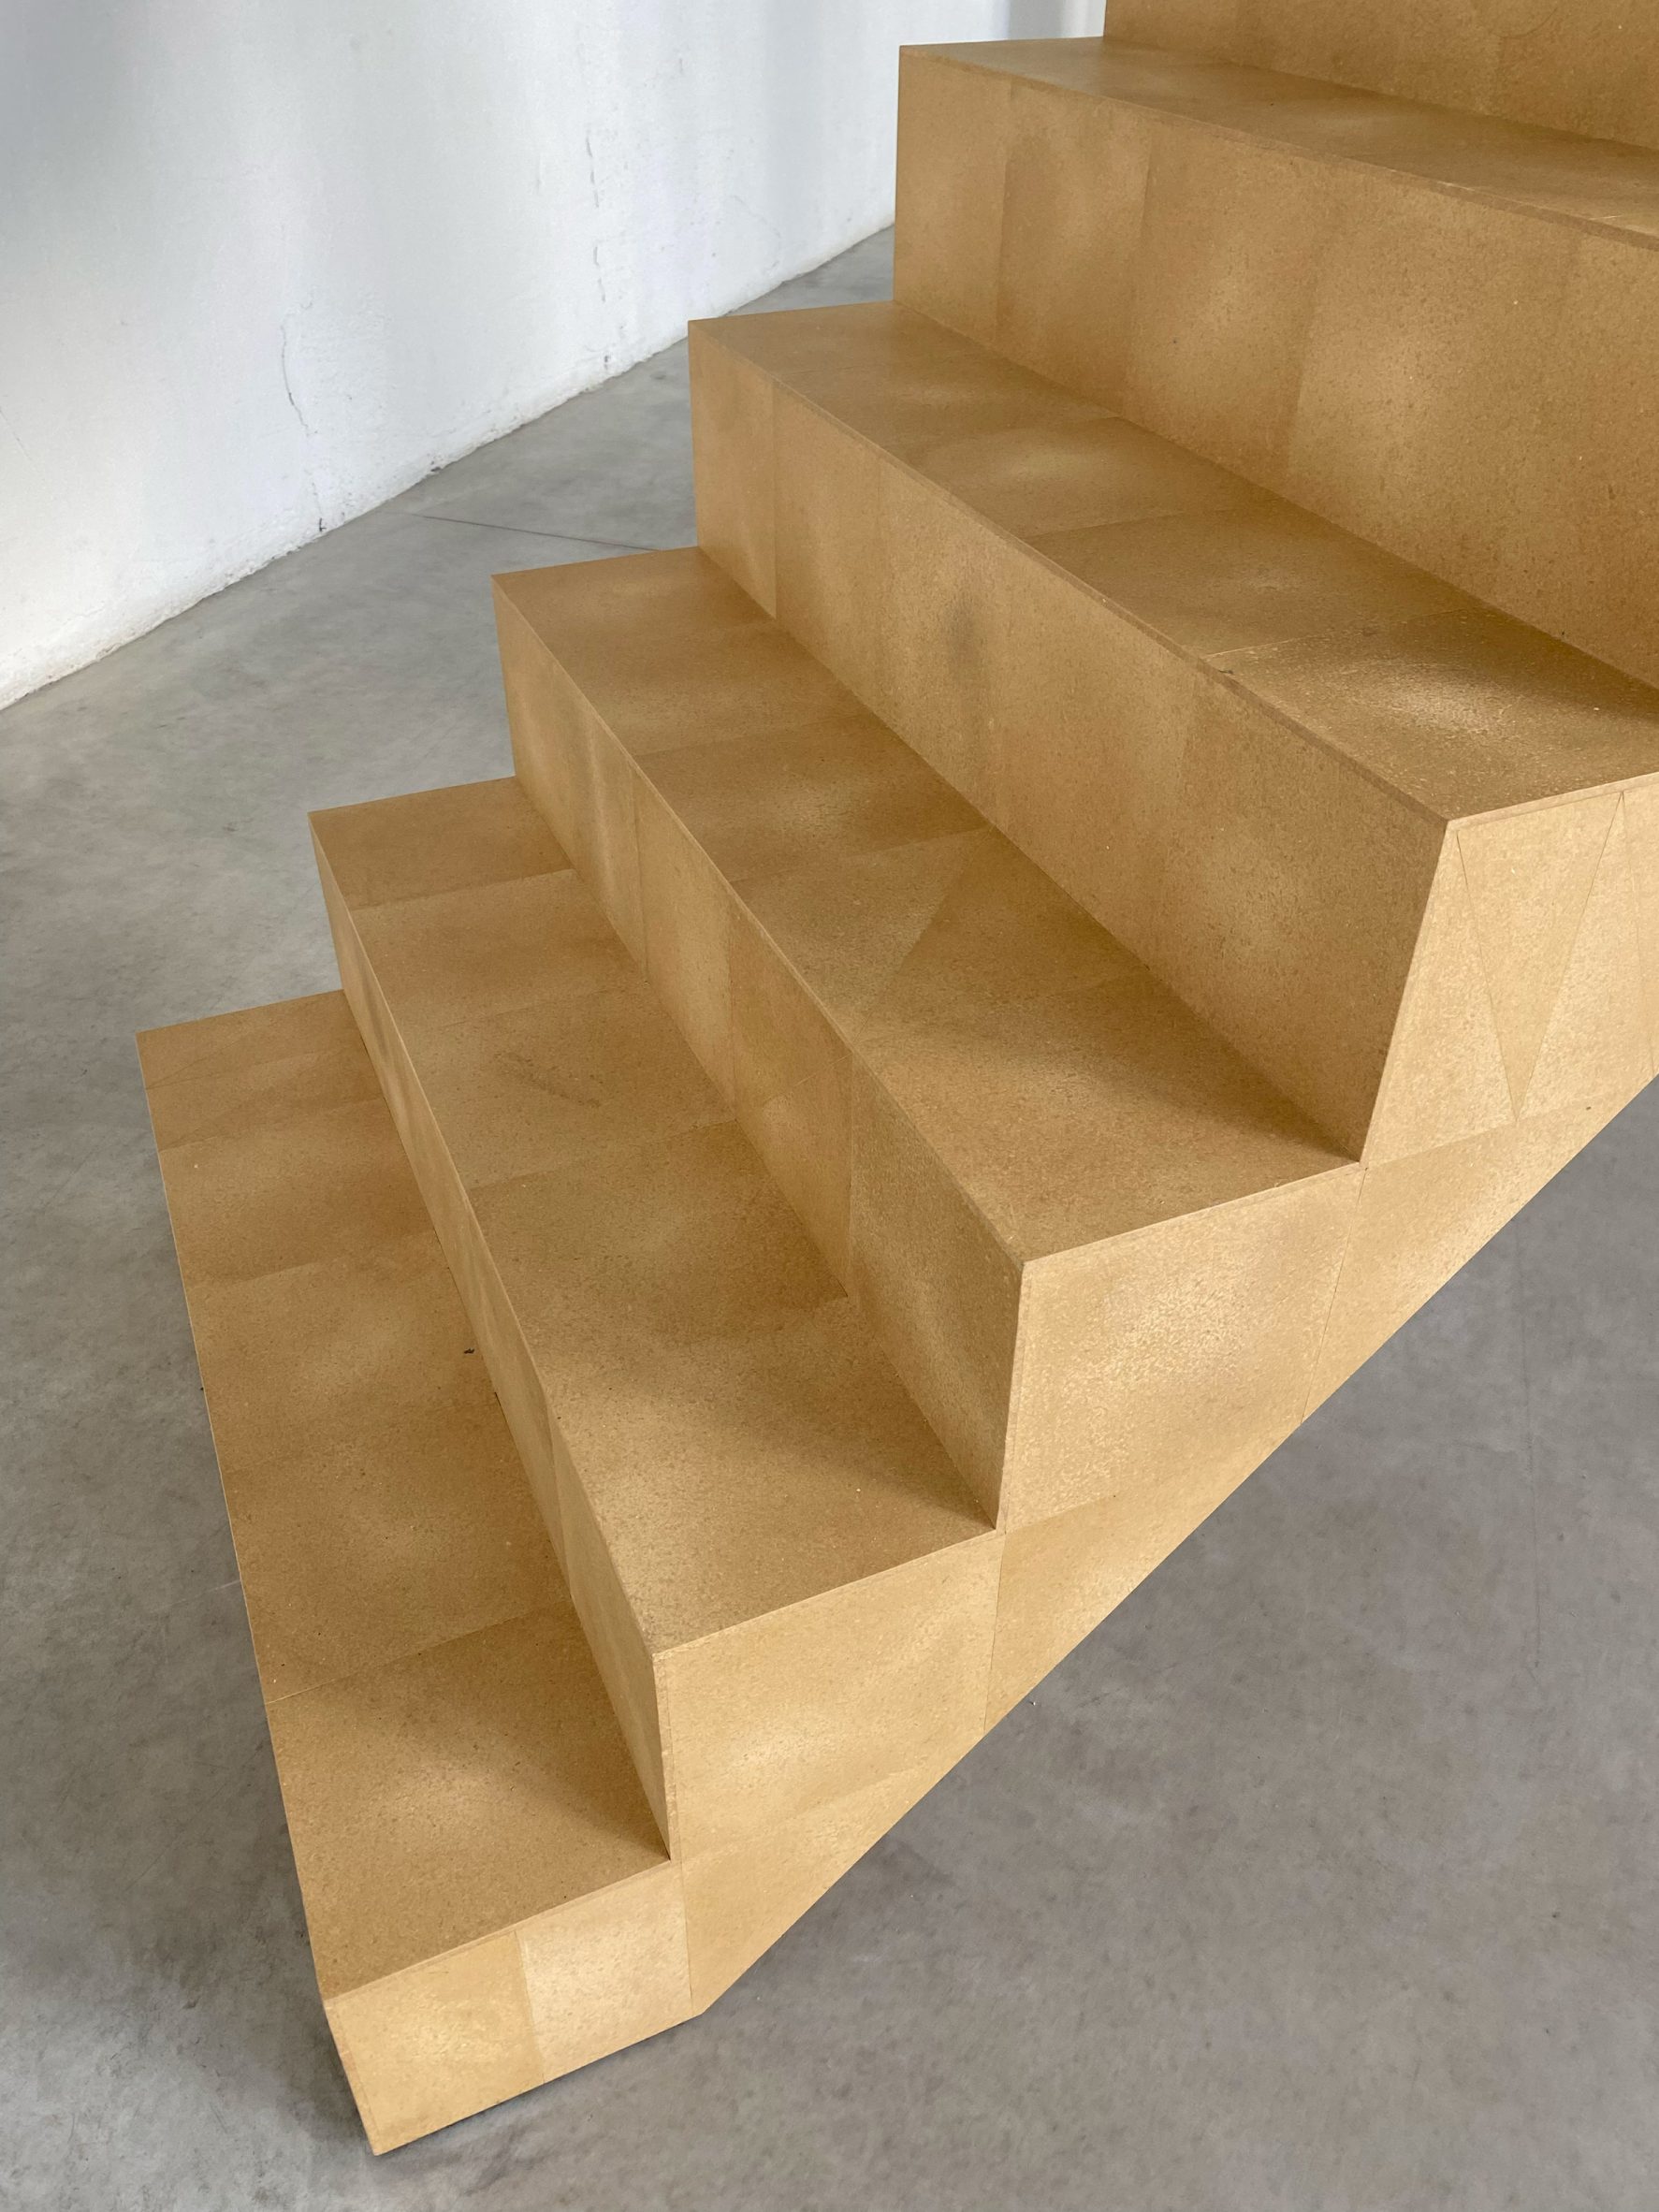 Tile-clad staircase by Dzek